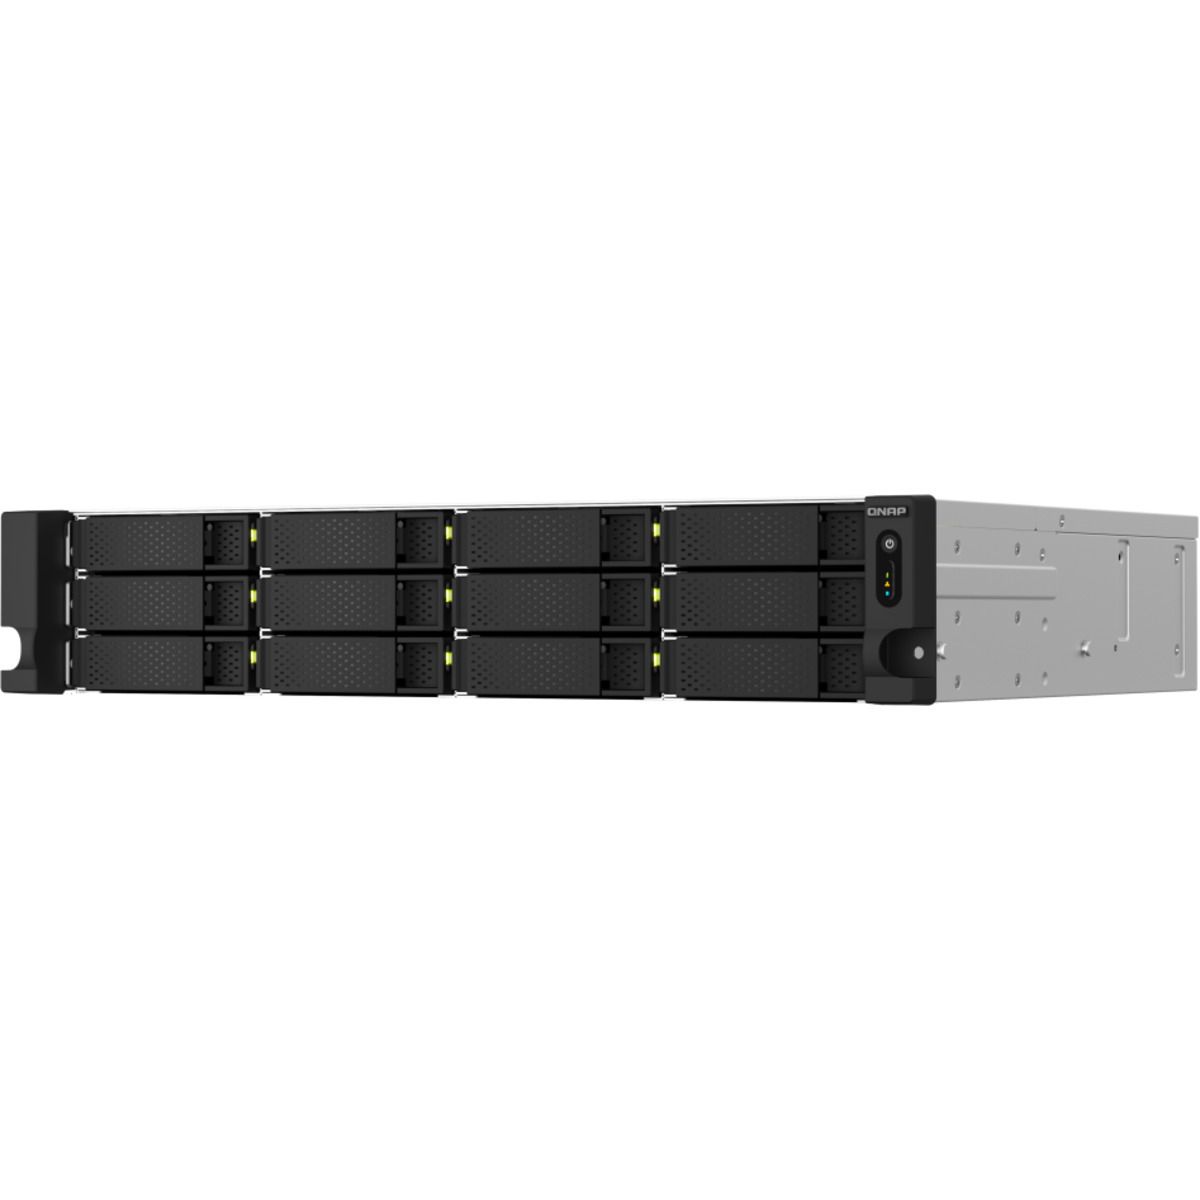 buy QNAP TS-1264U-RP RackMount NAS - Network Attached Storage Device Burn-In Tested Configurations - FREE RAM UPGRADE - nas headquarters buy network attached storage server device das new raid-5 free shipping usa TS-1264U-RP